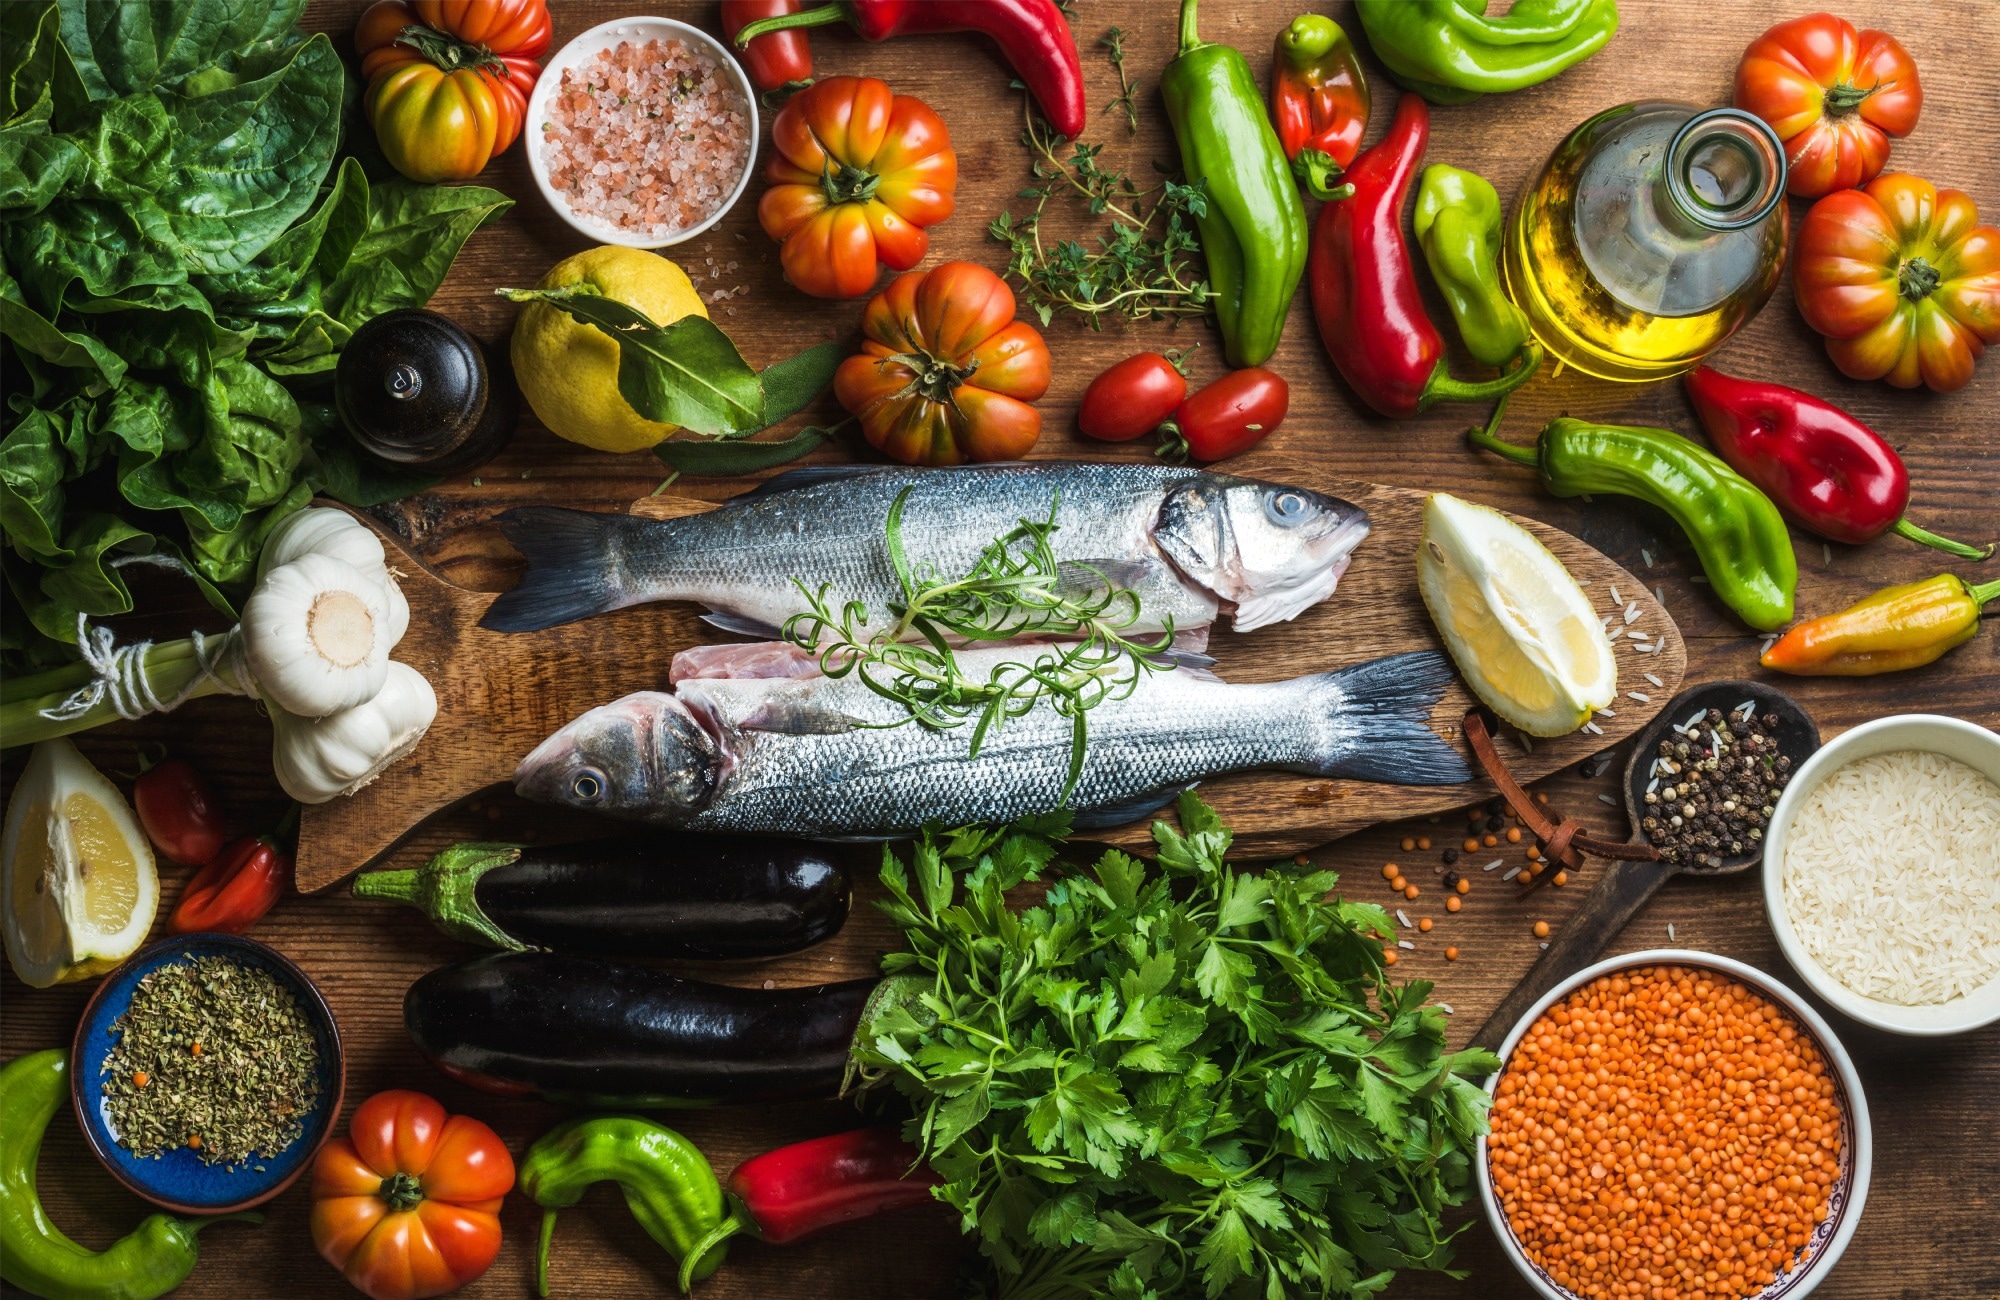 Does Mediterranean food regimen adherence affect psychological well being?